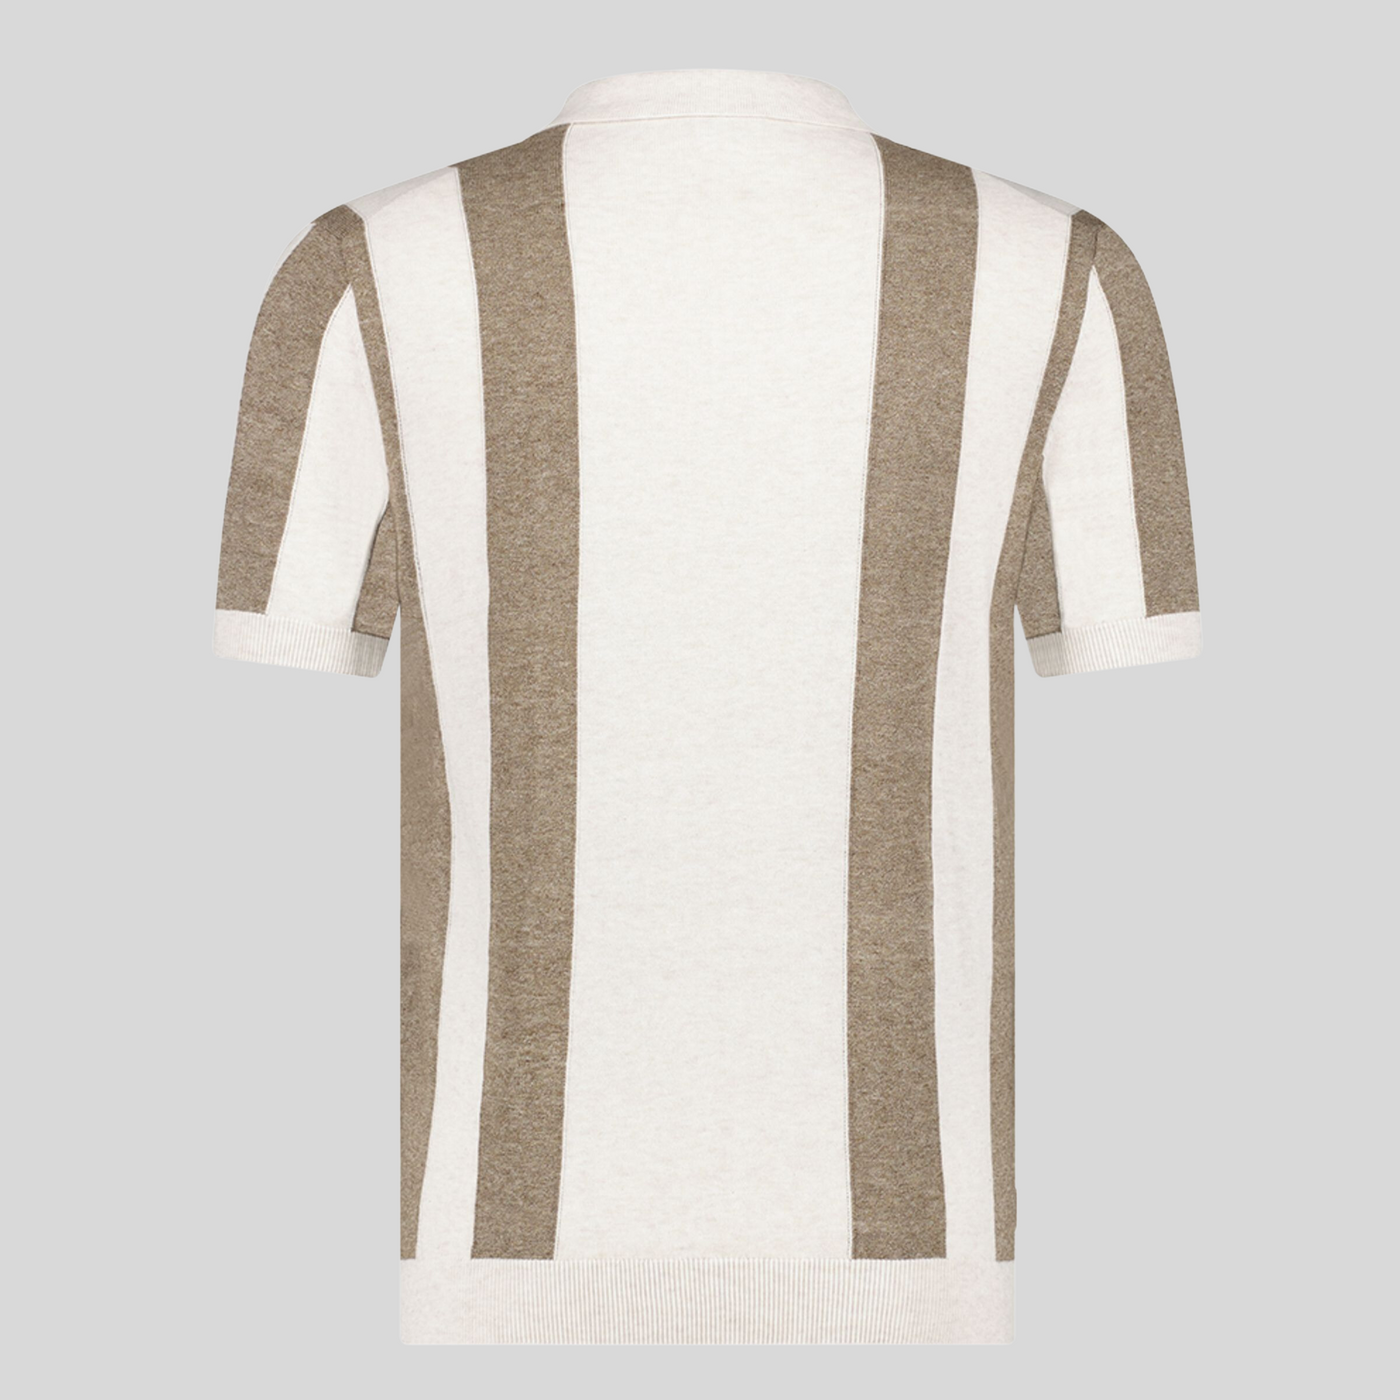 Gotstyle Fashion - Blue Industry Polos Block Stripe Knit Polo - Brown